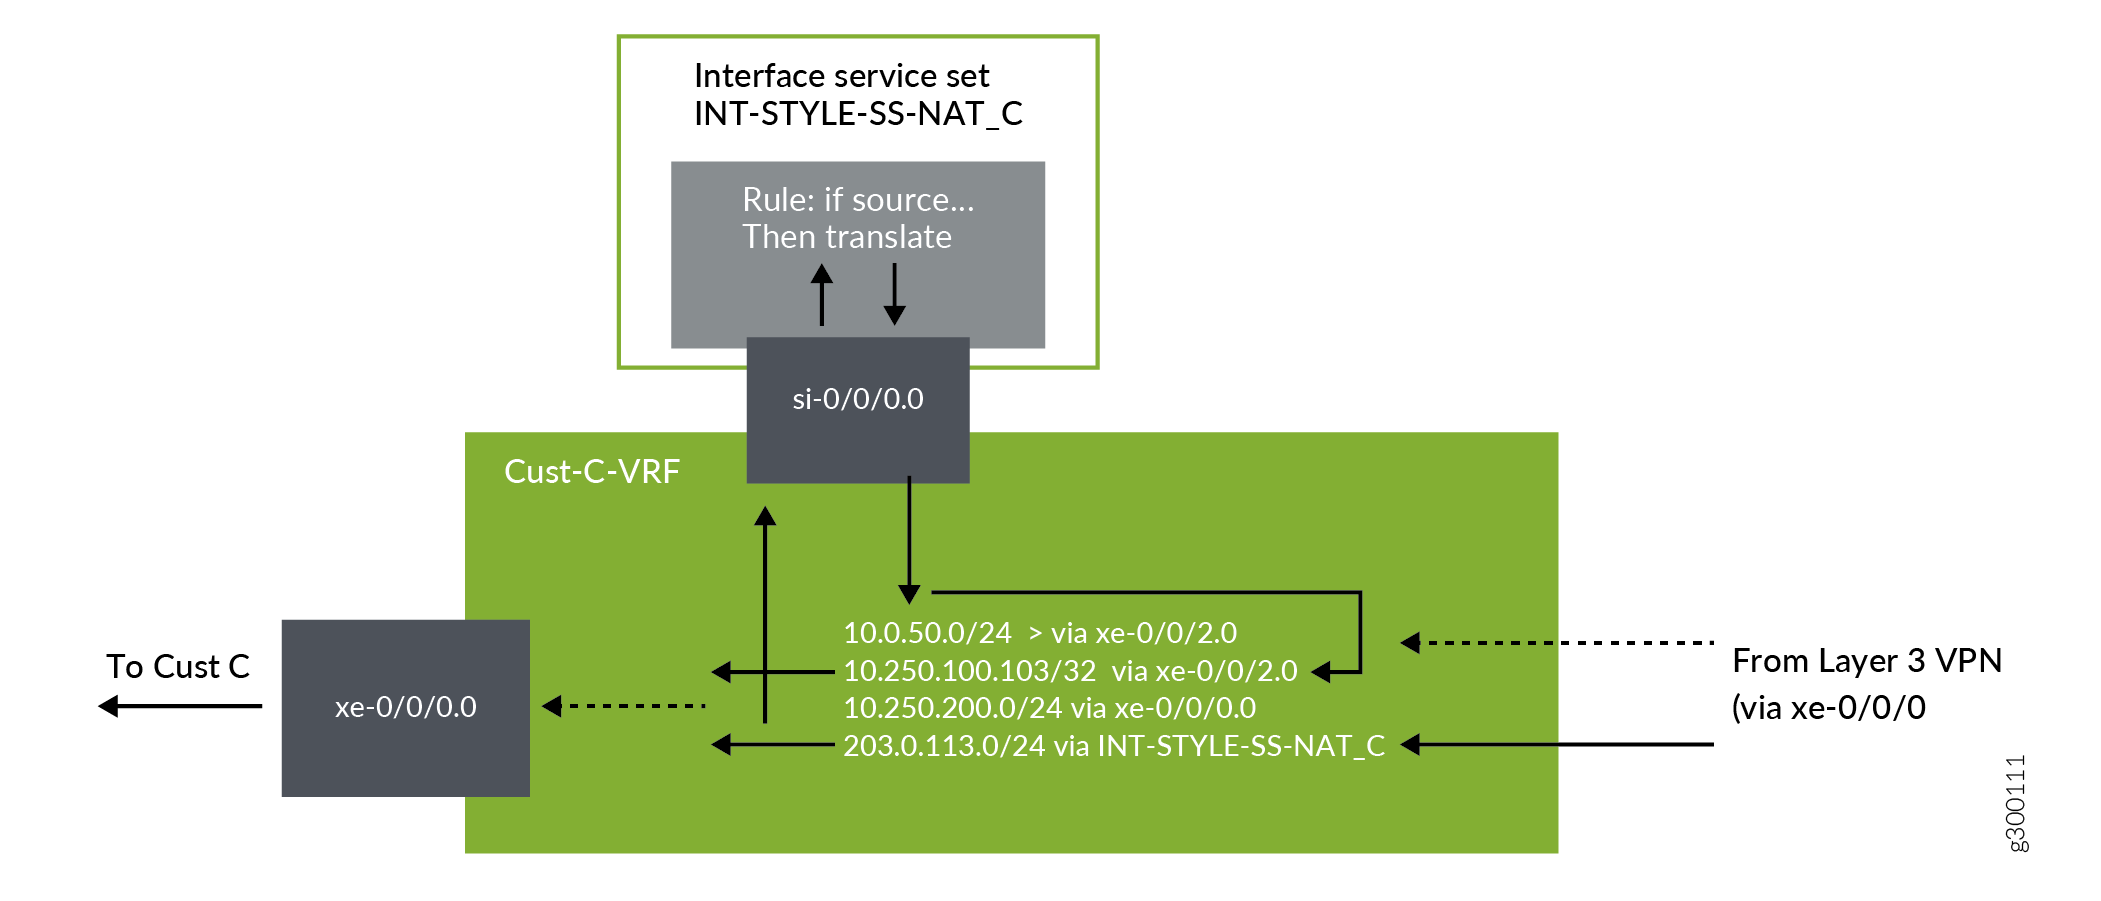 Traffic
Flow on PE2 for Interface-Style NAT Traffic from Cloud Services to
Customer C LAN